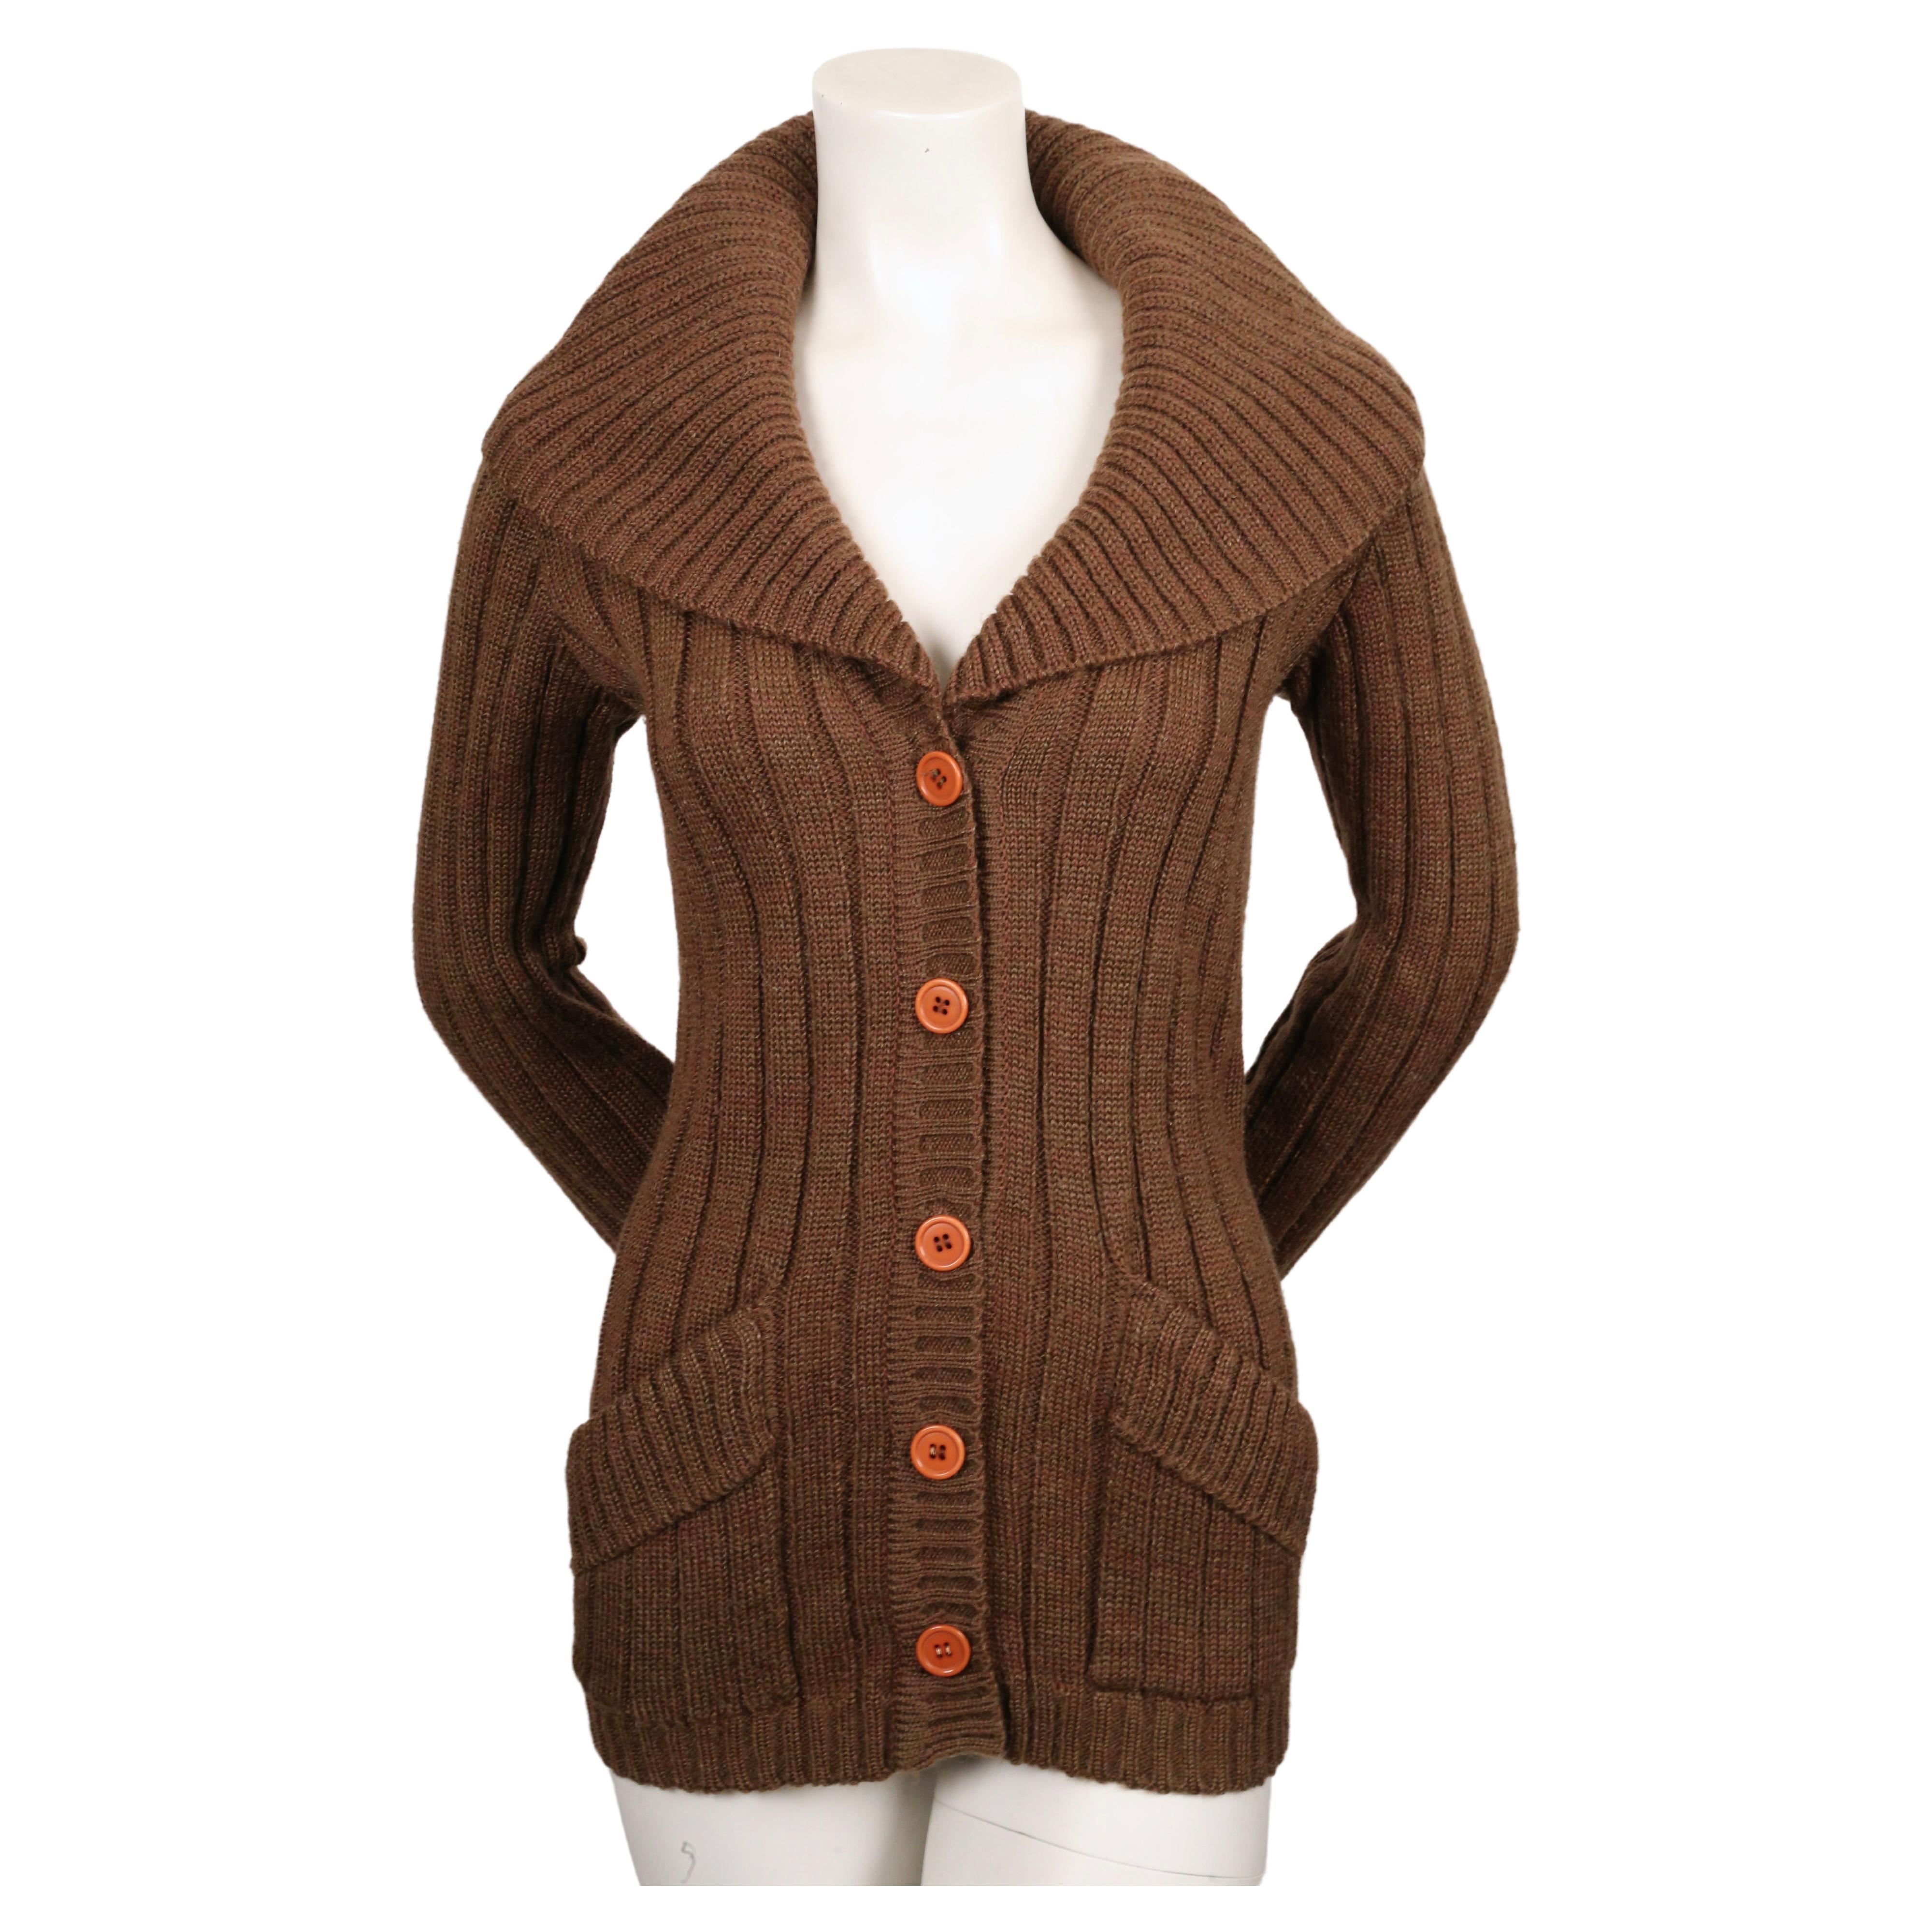 Brown, ribbed cardigan sweater with oversized shawl collar designed by Yves Saint Laurent dating to the 1970's. Labeled a size 